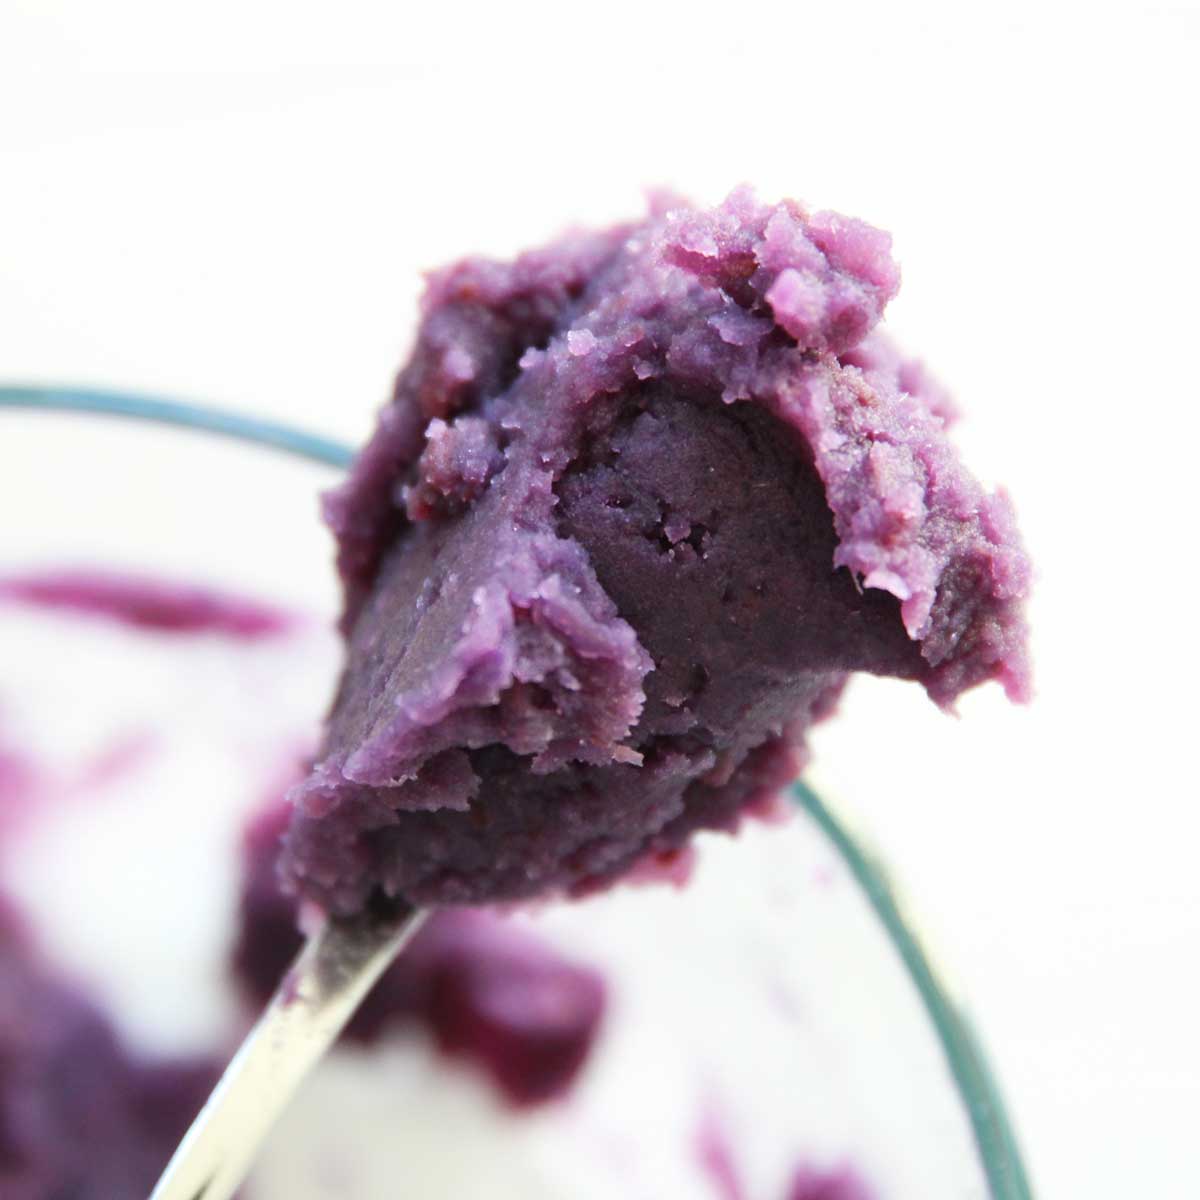 Purple Sweet Potato Filling Recipe for Mochi, Mooncakes and Steamed Buns - Caramel Apple Dip